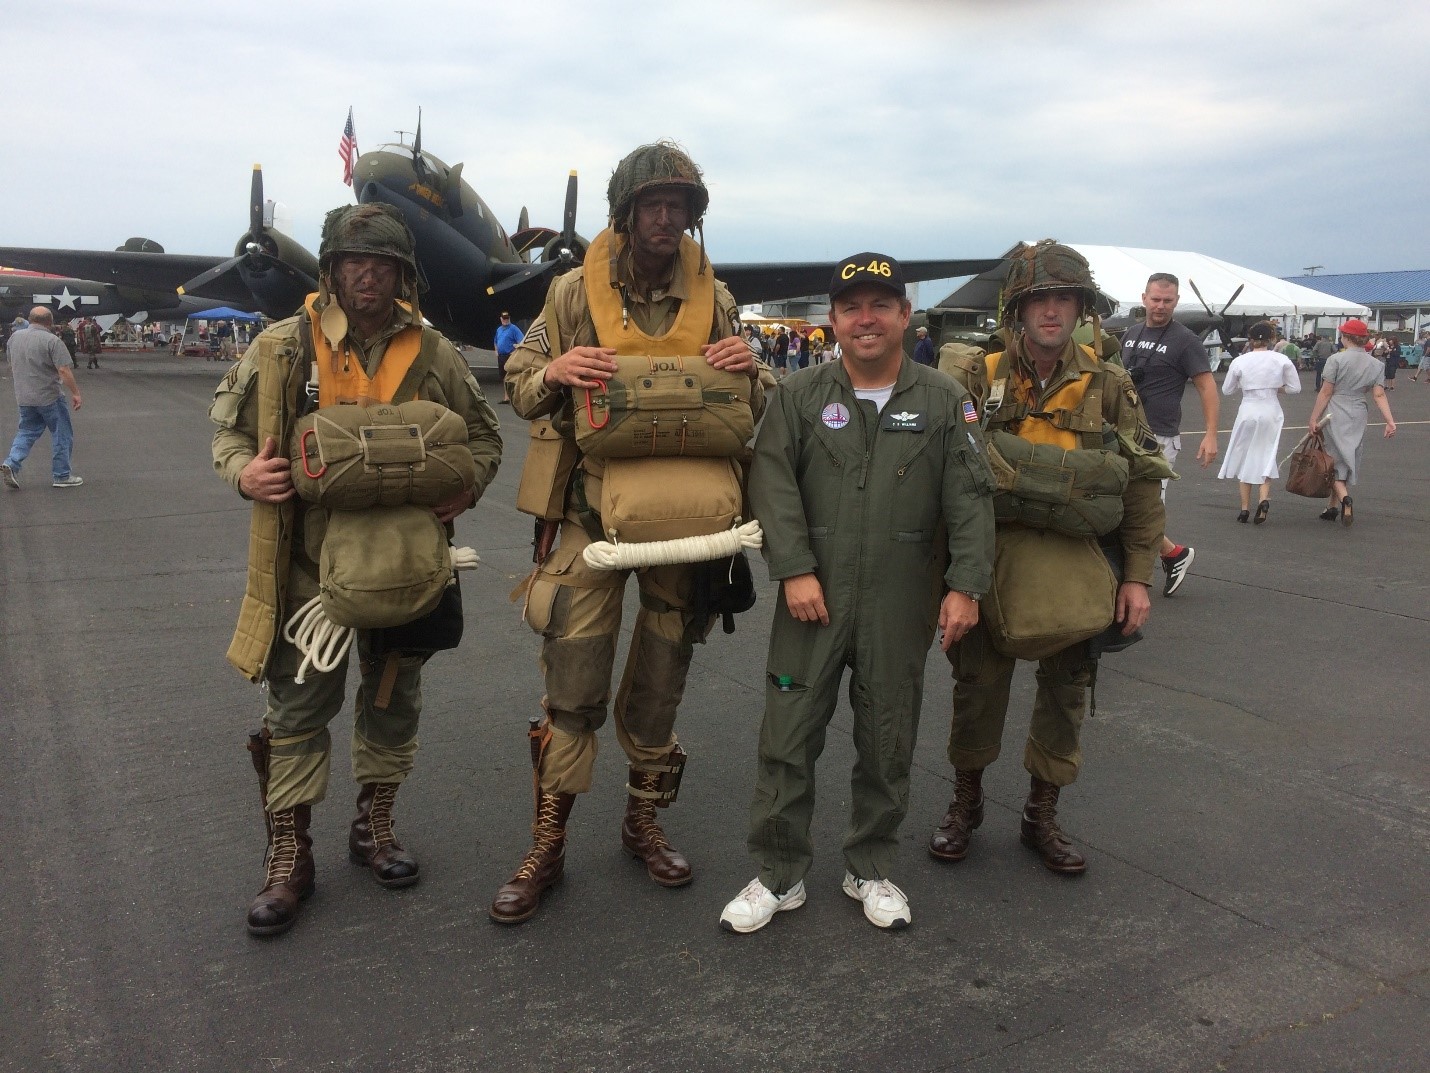 Scott William and WWI Paratroopers